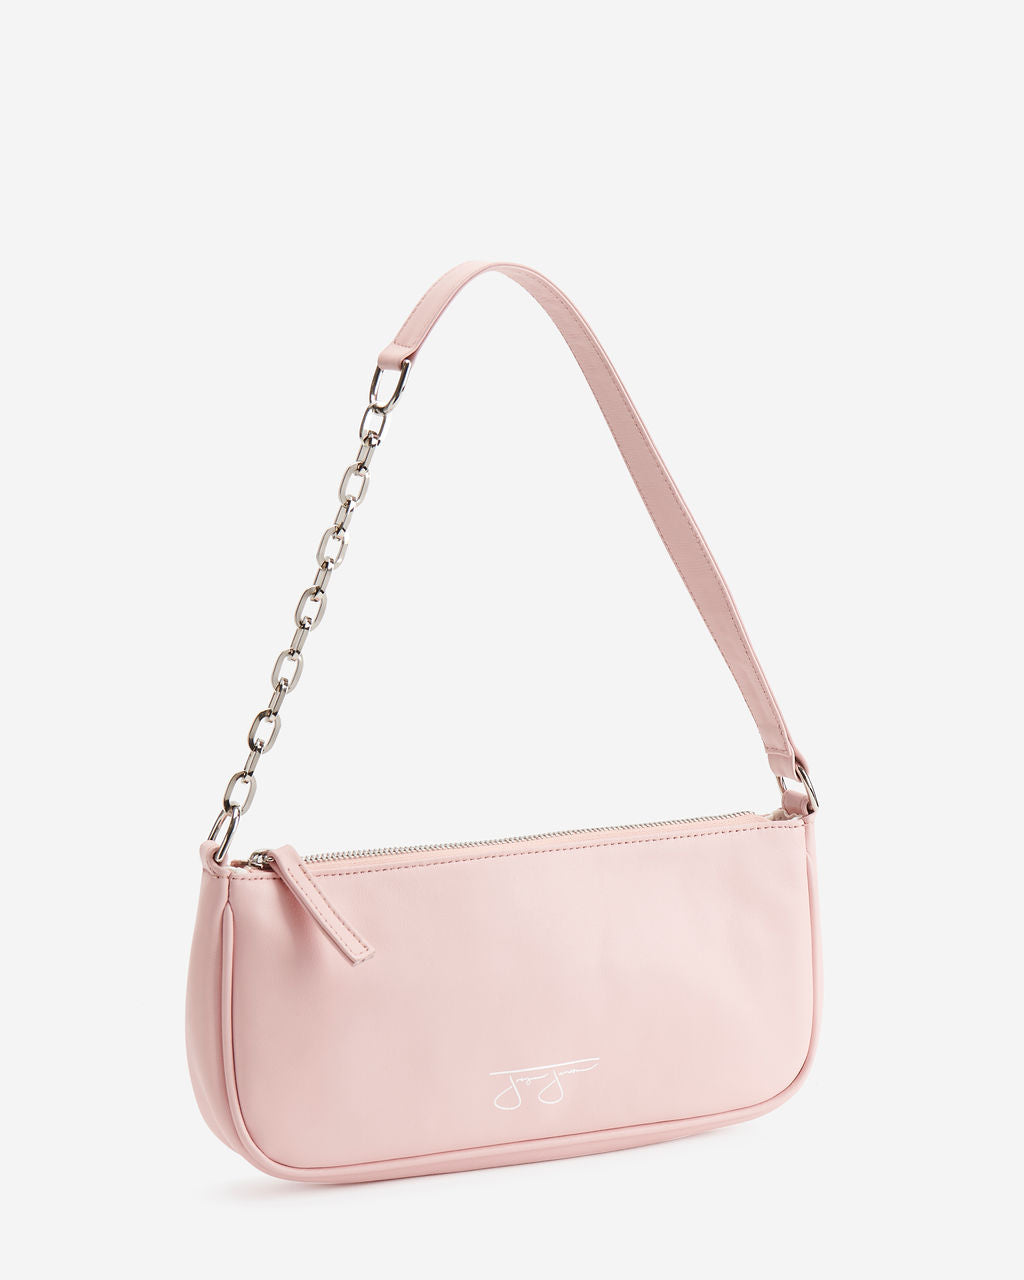 Lucy Bag - Buffed Pink  Joey James, The Label   